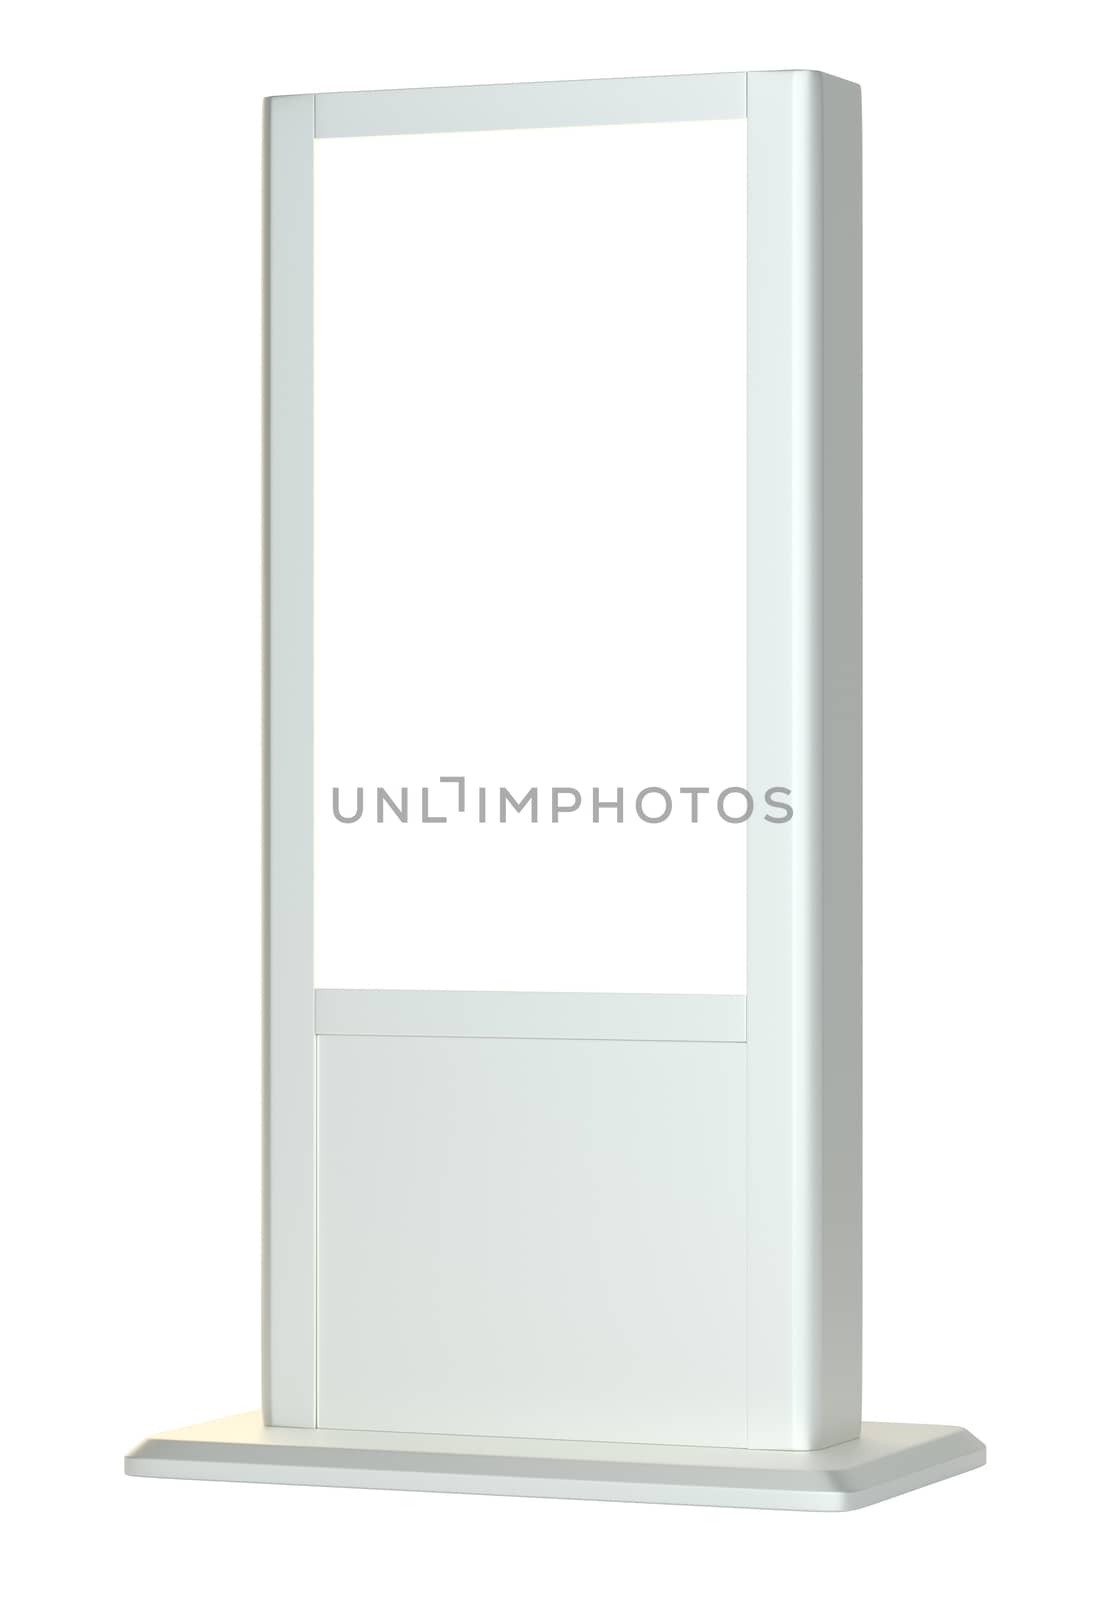 Realistic light box template on white background. 3D Illustration